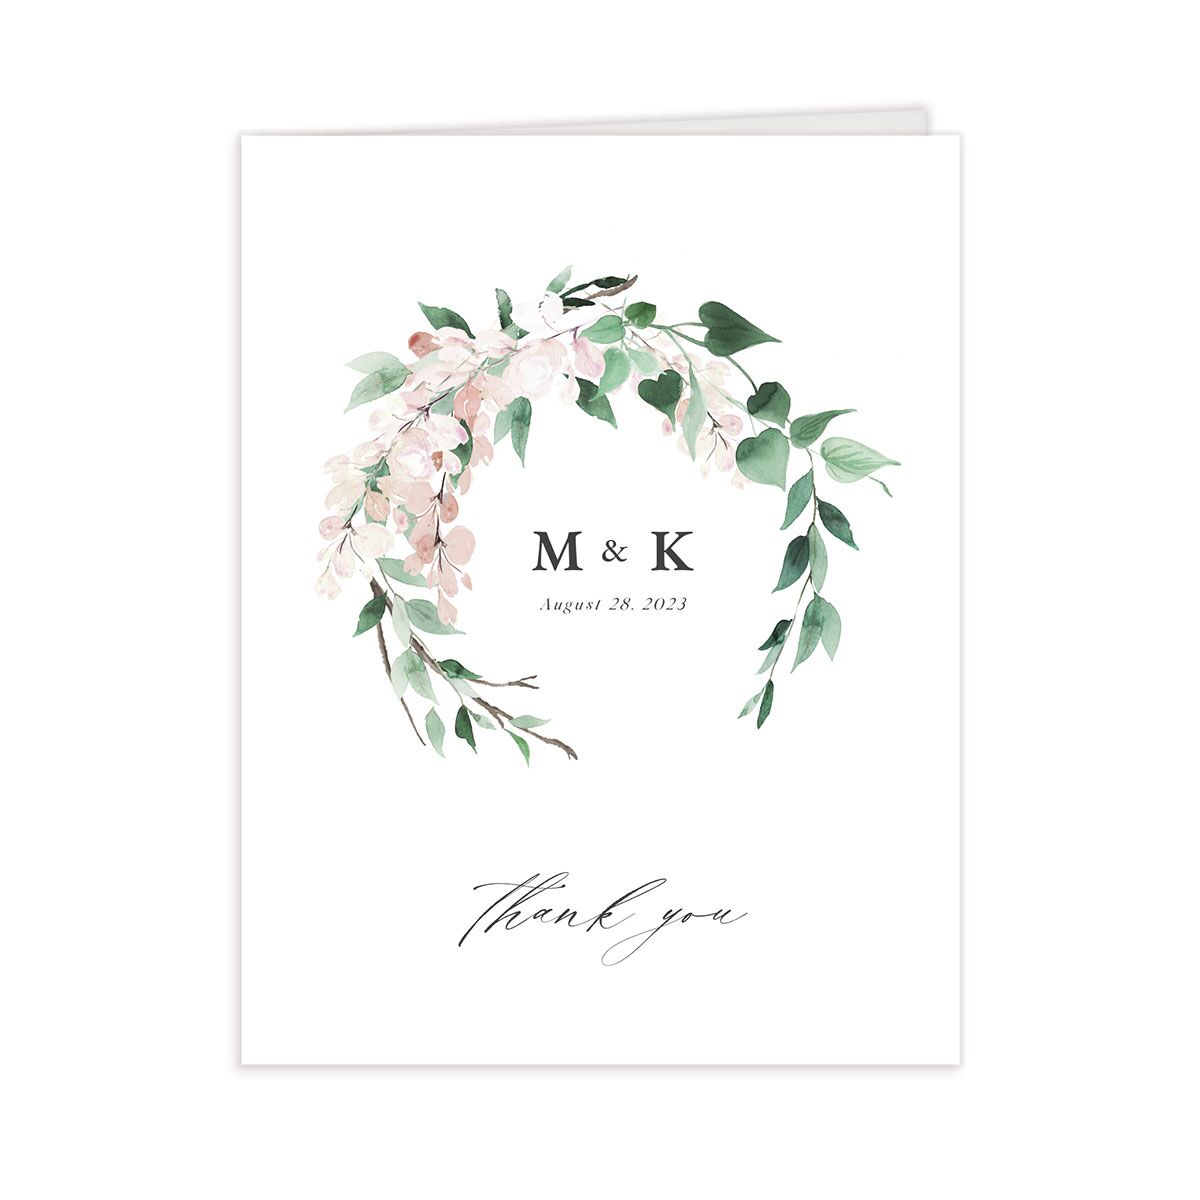 Enchanting Wisteria Thank You Cards